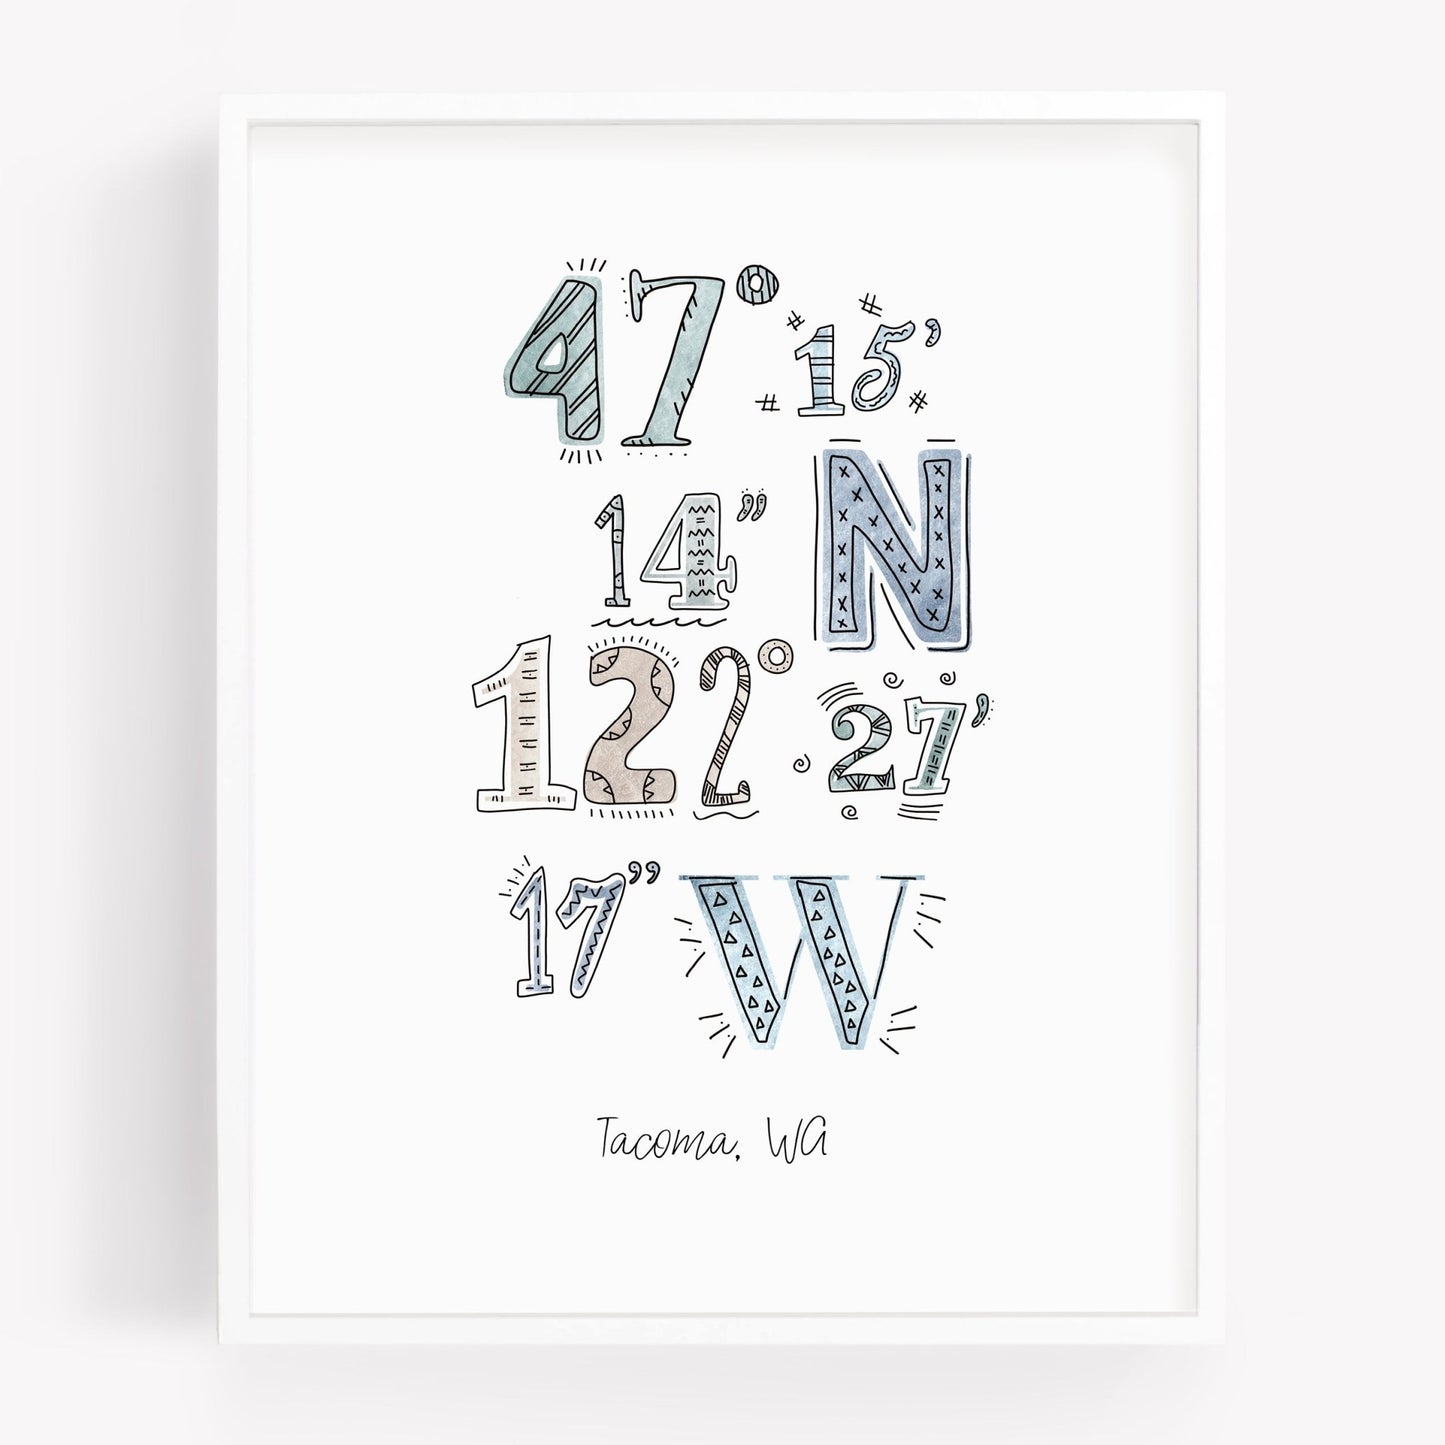 A city art print of a drawing of the coordinates of Tacoma WA - Sparks House Co